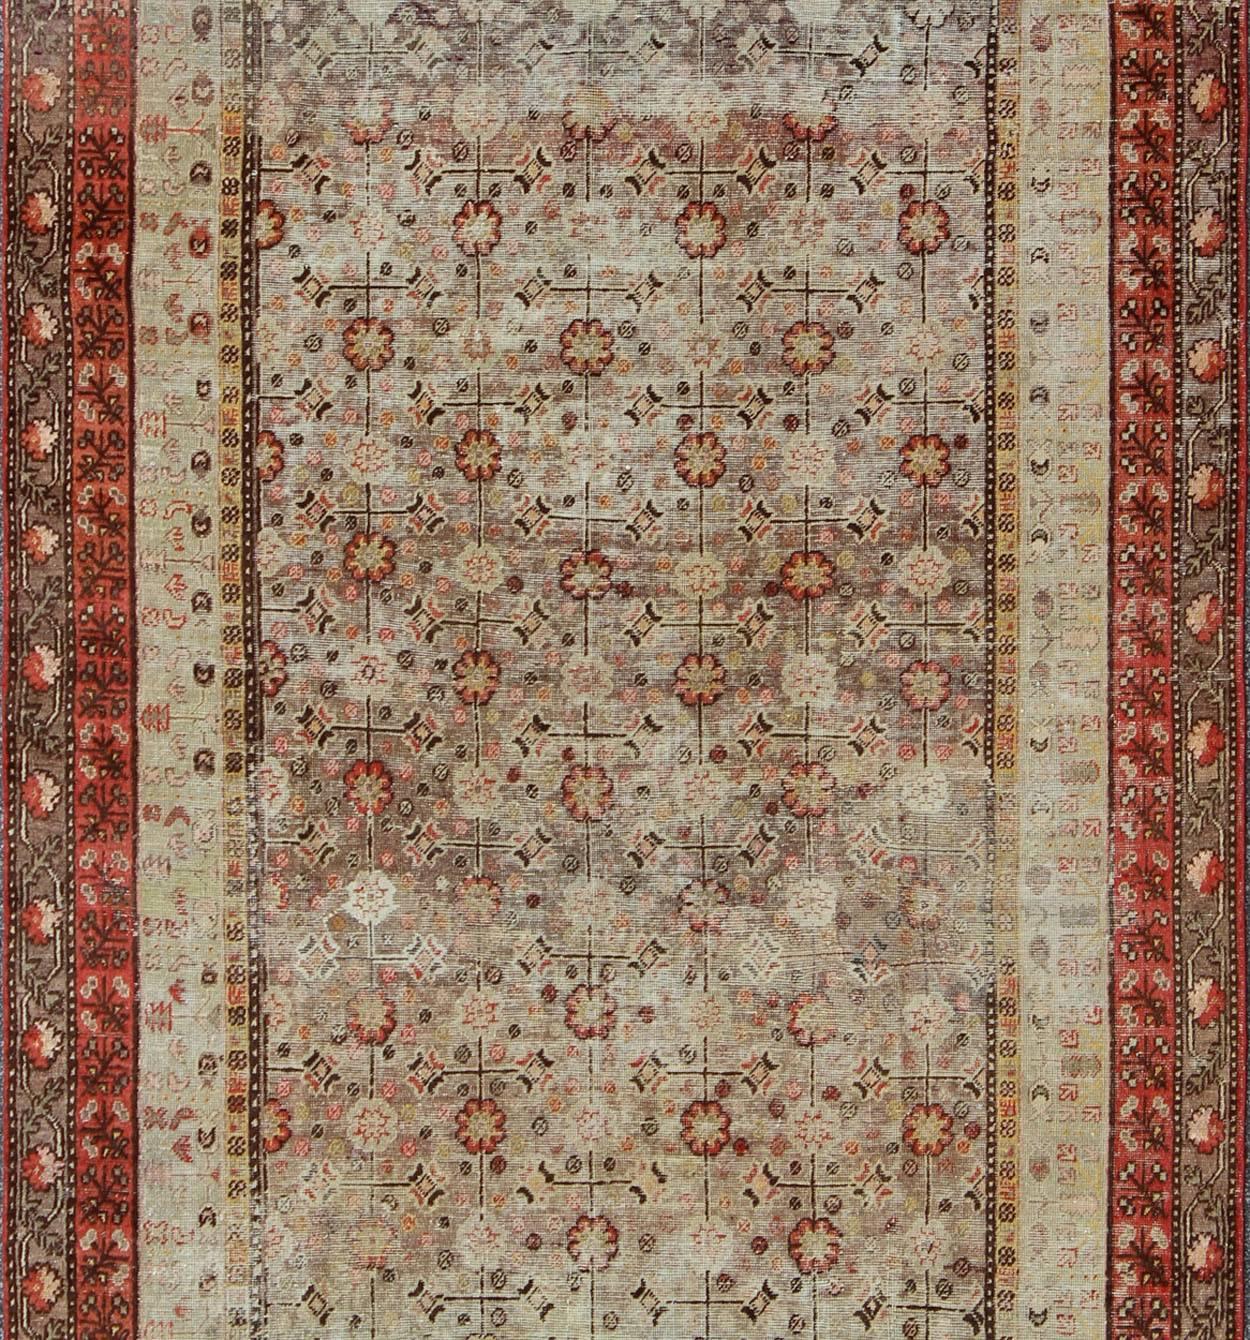 Hand-Knotted Exquisite Antique Khotan Rug with Intricate All-Over Sub-Geometric Floral Design For Sale